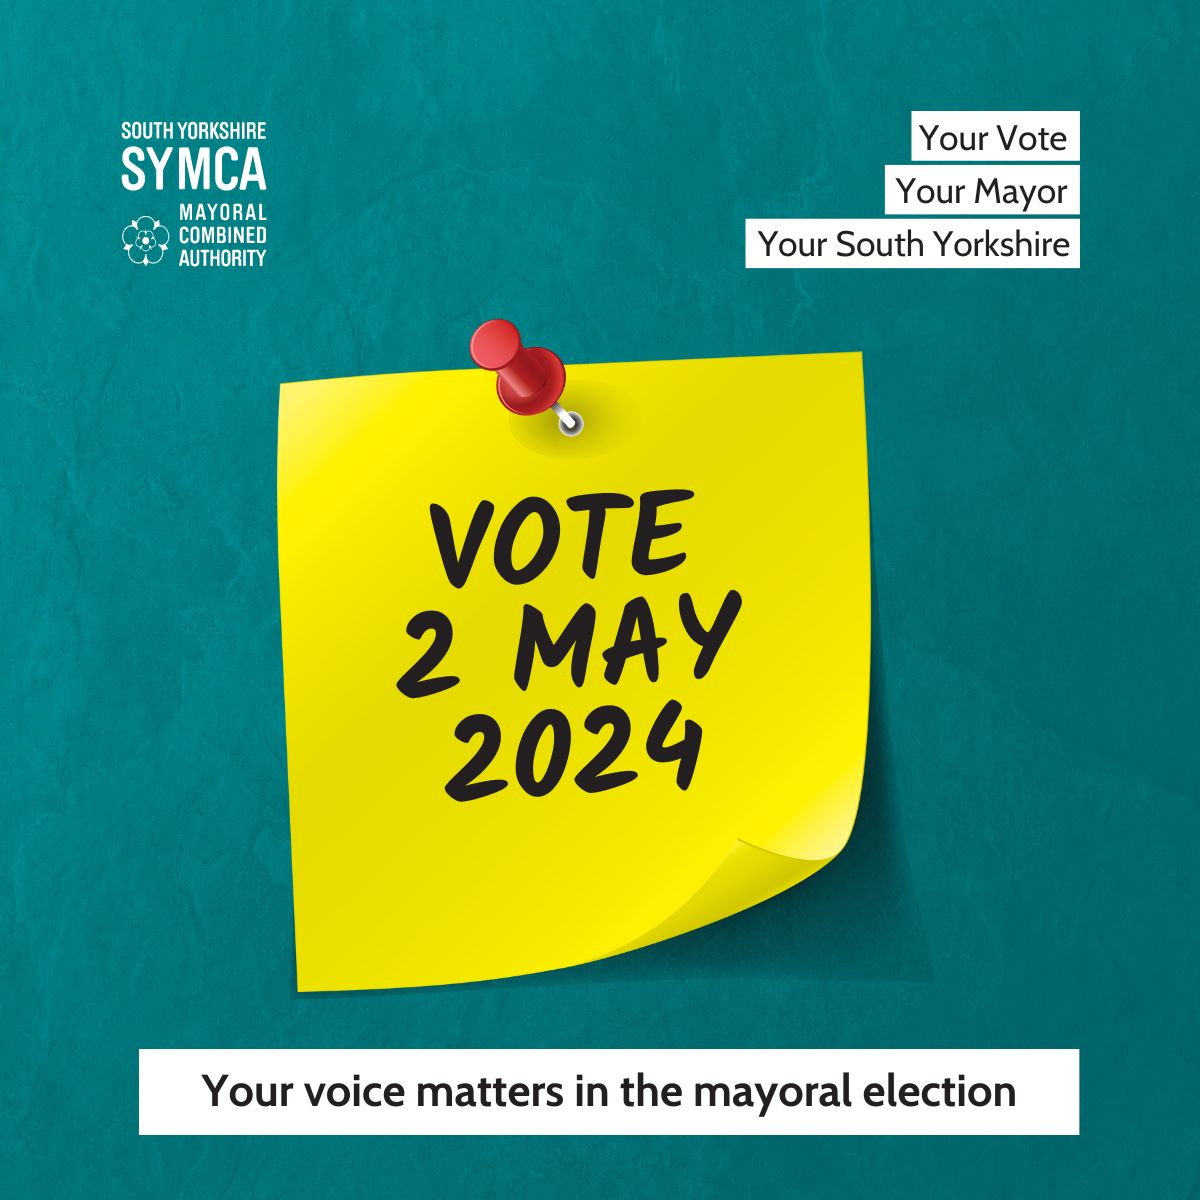 Tomorrow is your last day to apply to vote by post. You can apply online to get a postal vote, please complete by no later than 5pm. Apply here: orlo.uk/8wP7U #syelects